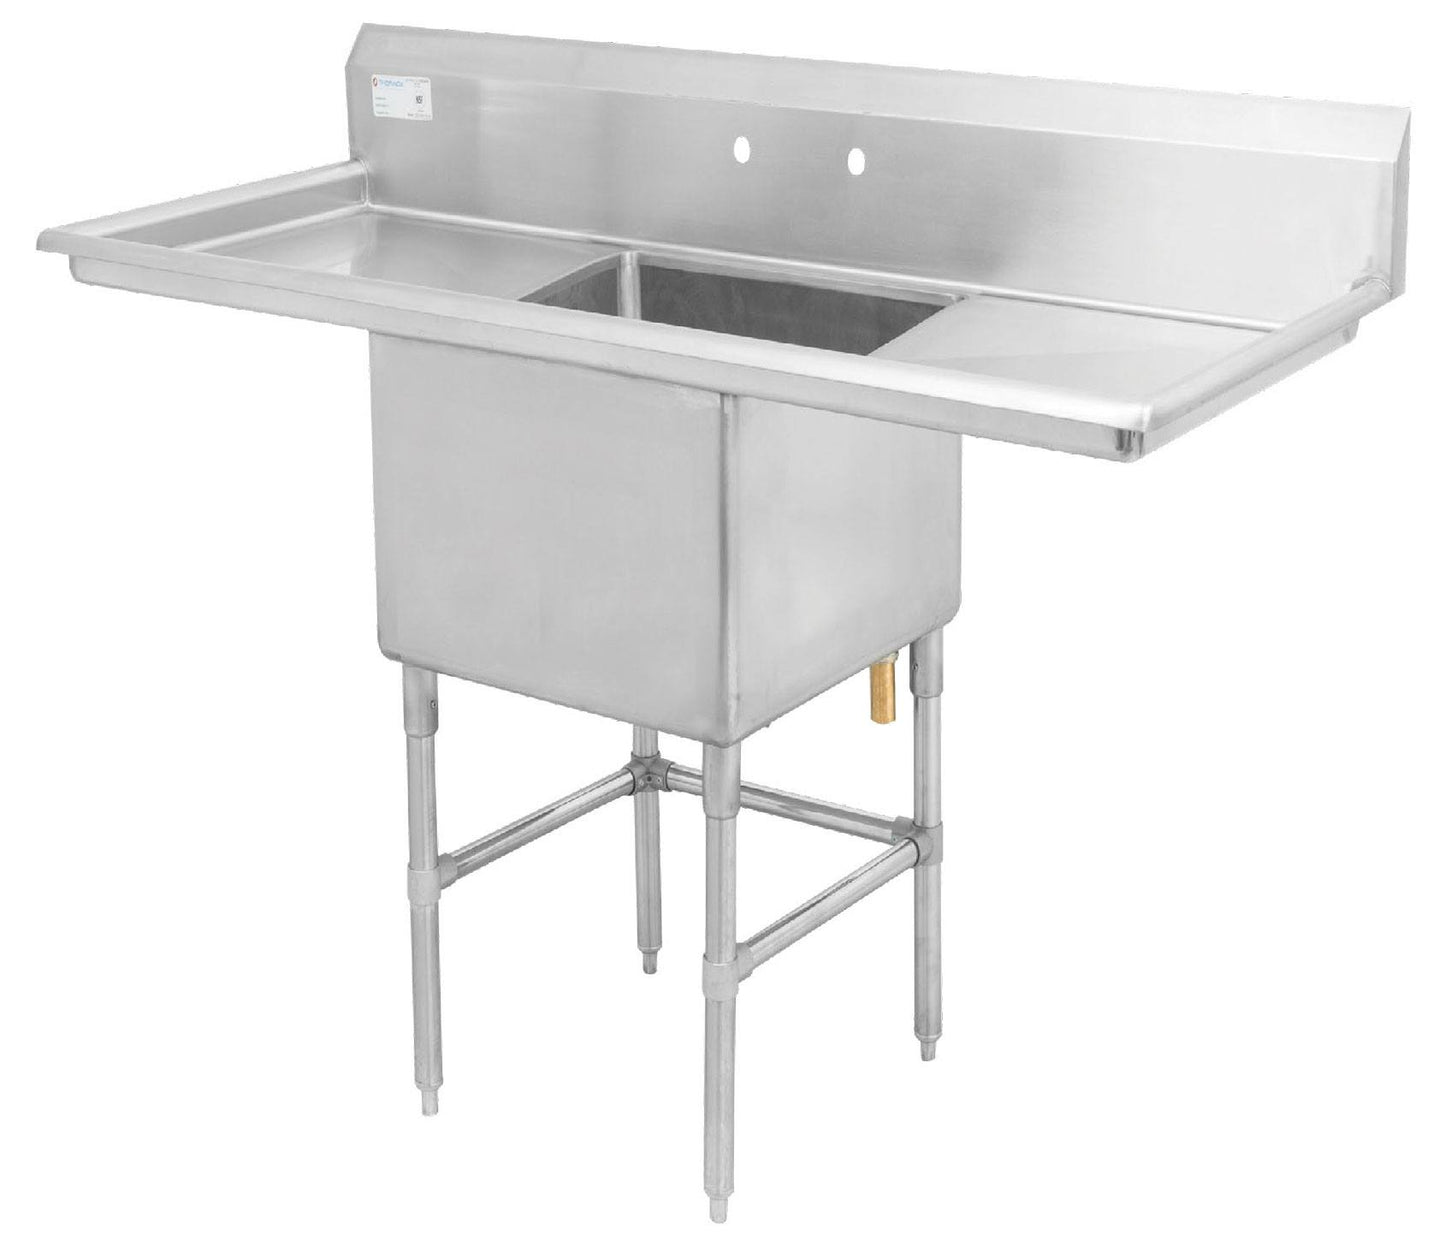 Thorinox  
TSS-1818-R18  
Sink, one compartment, 38-1/2"W x 23-1/2"D x 36-1/2"H, 18/304 stainless steel construction